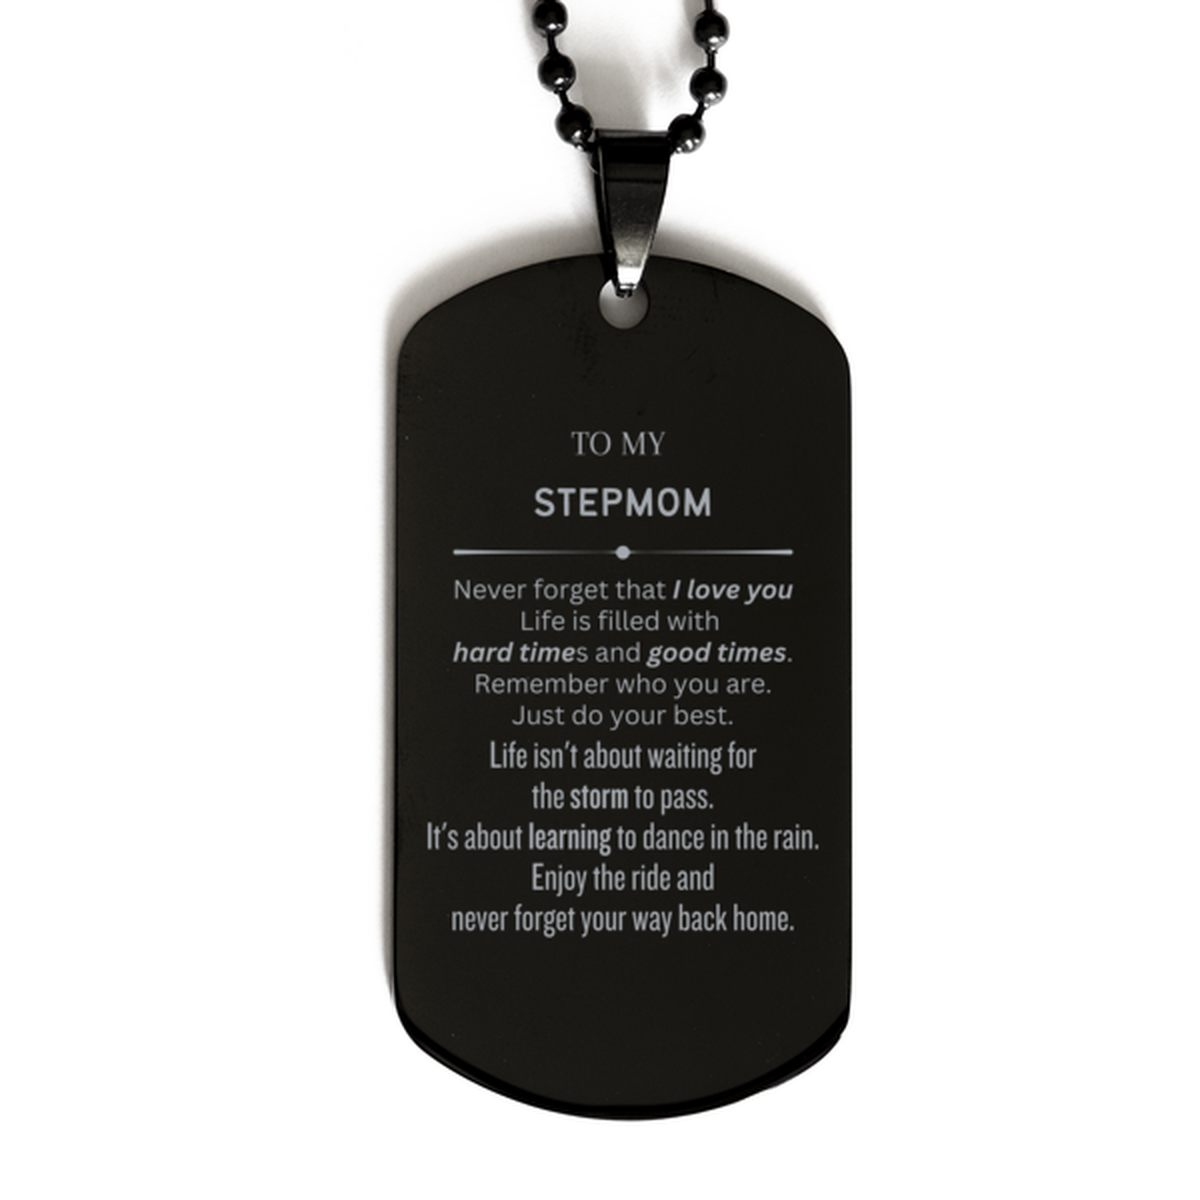 Christmas Stepmom Black Dog Tag Gifts, To My Stepmom Birthday Thank You Gifts For Stepmom, Graduation Unique Gifts For Stepmom To My Stepmom Never forget that I love you life is filled with hard times and good times. Remember who you are. Just do your bes